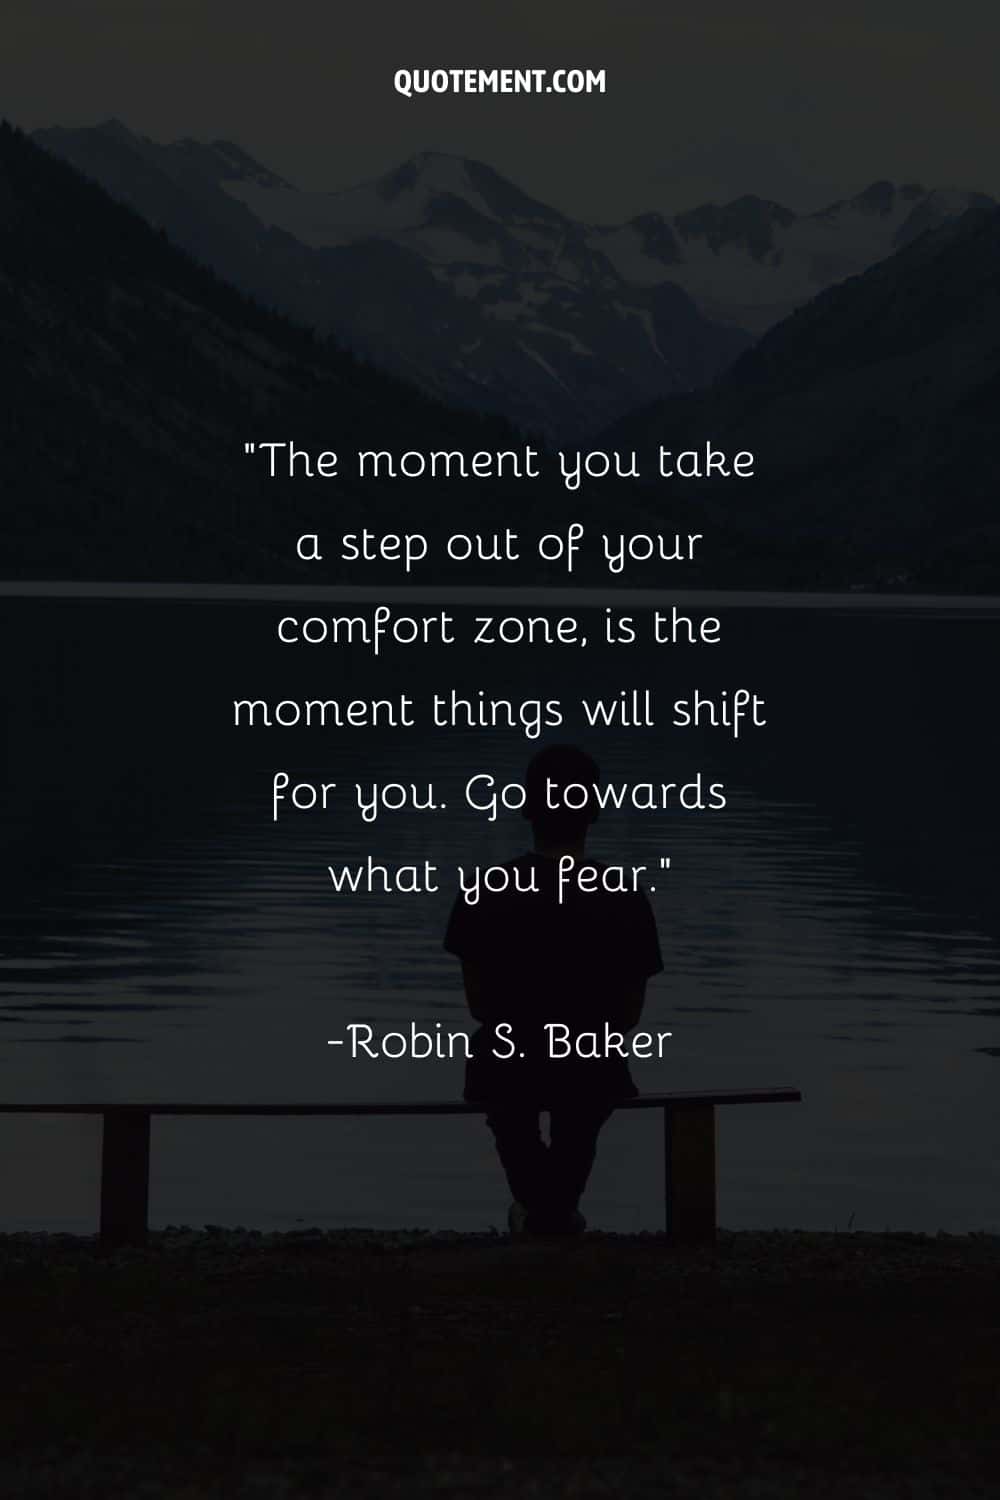 Image of a person sitting on a bench by the water representig a quote about comfort zone.